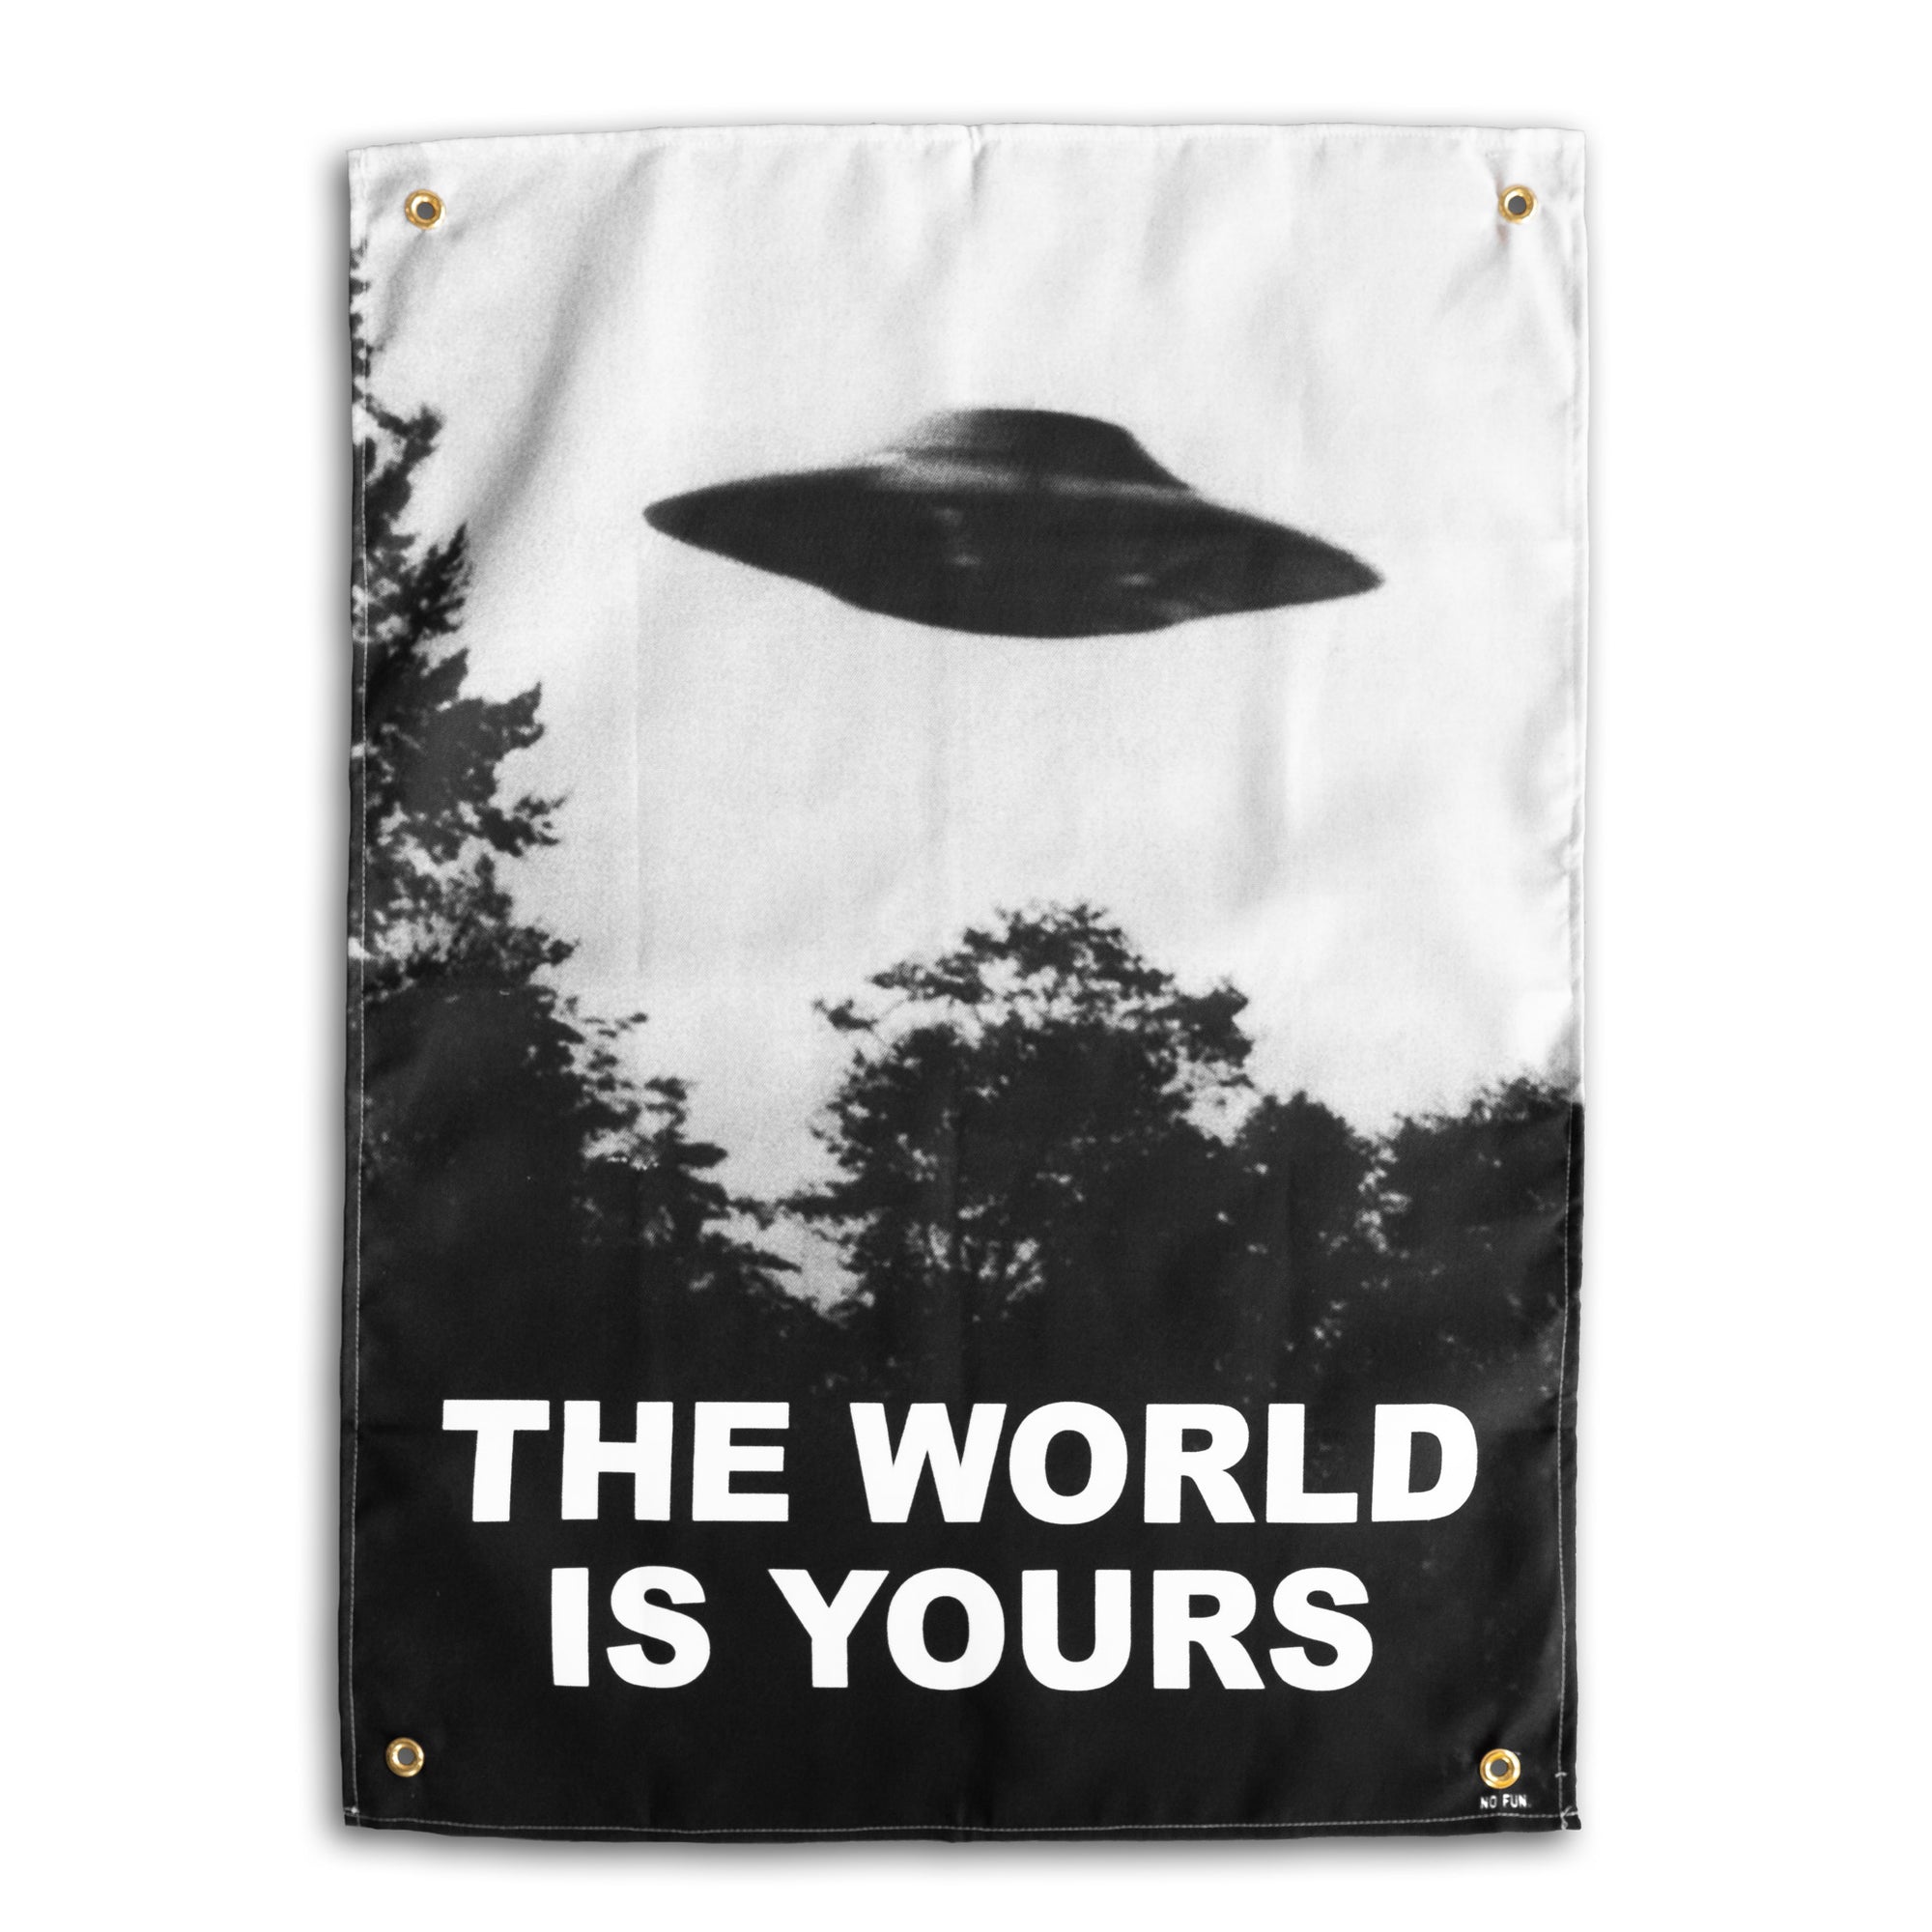 The "Blimp" Wall Tapestry by No Fun®.  Tapestry features a greyscale image of a UFO hovering above some trees.  The phrase "THE WORLD IS YOURS" is printed in large white letters underneath the UFO.  There is 1 brass grommet in each corner of the tapestry.